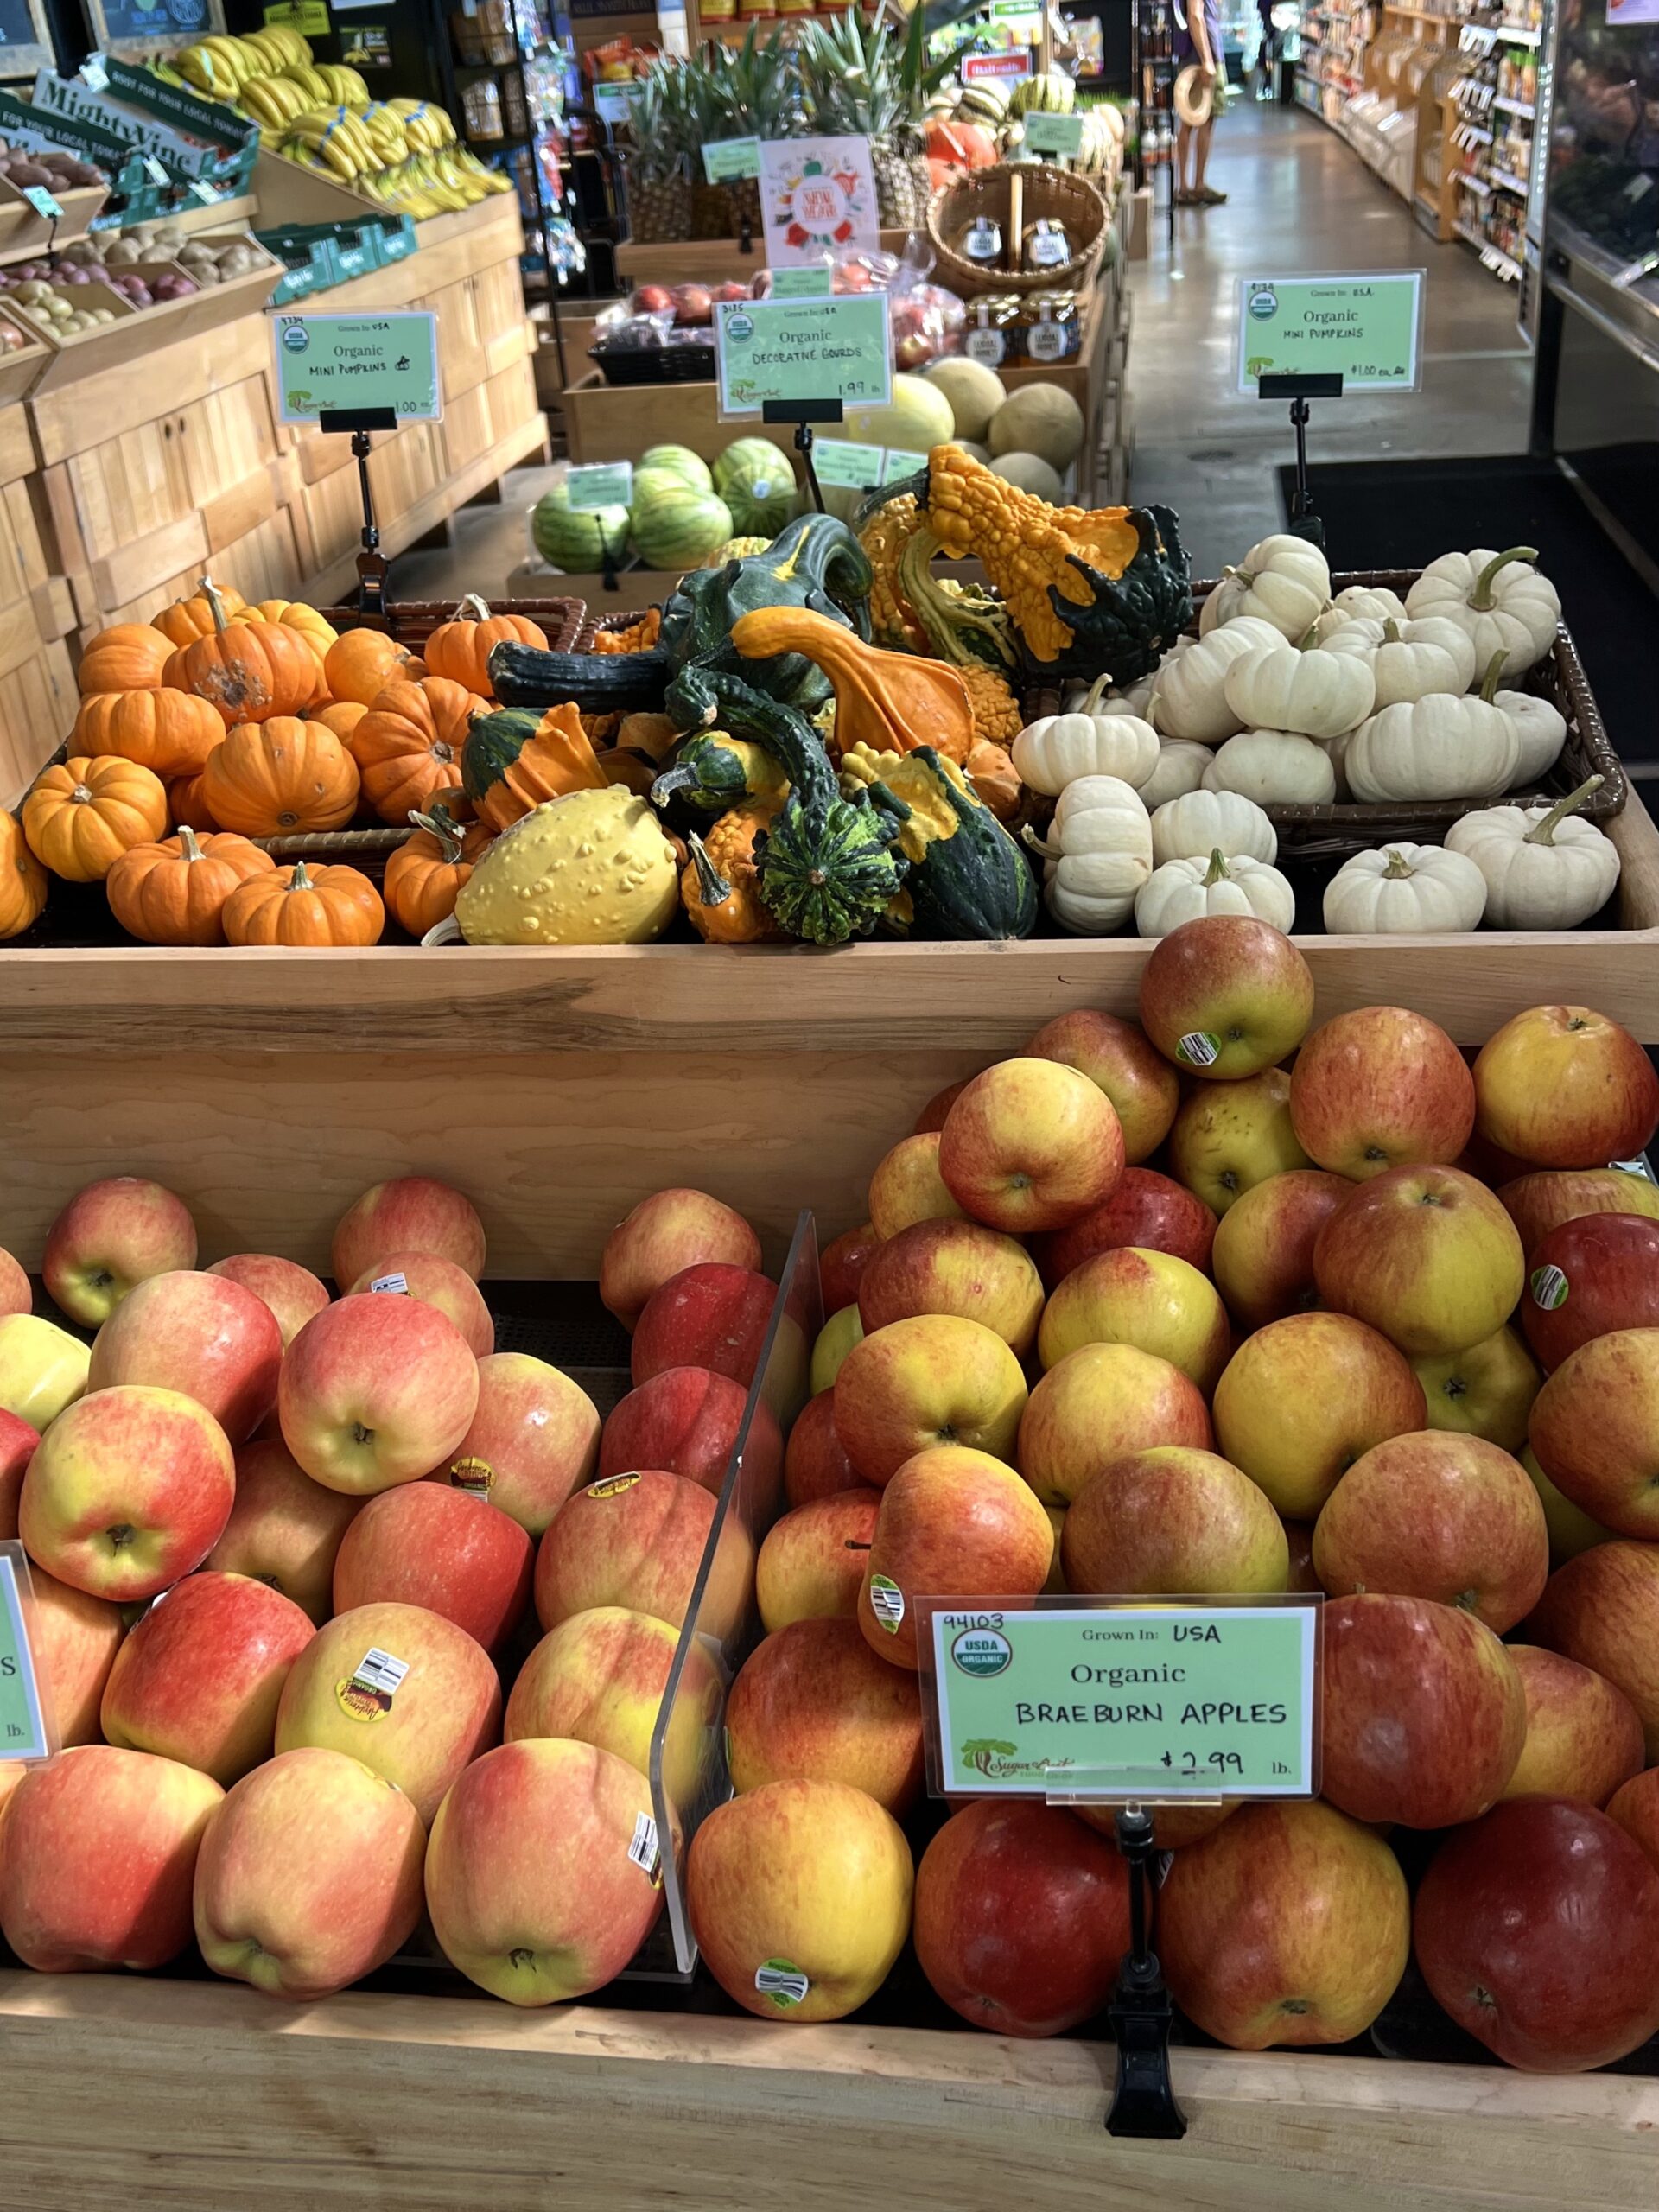 Celebrating National Co-op Month With A Look At Two Community-Building Grocery Stores